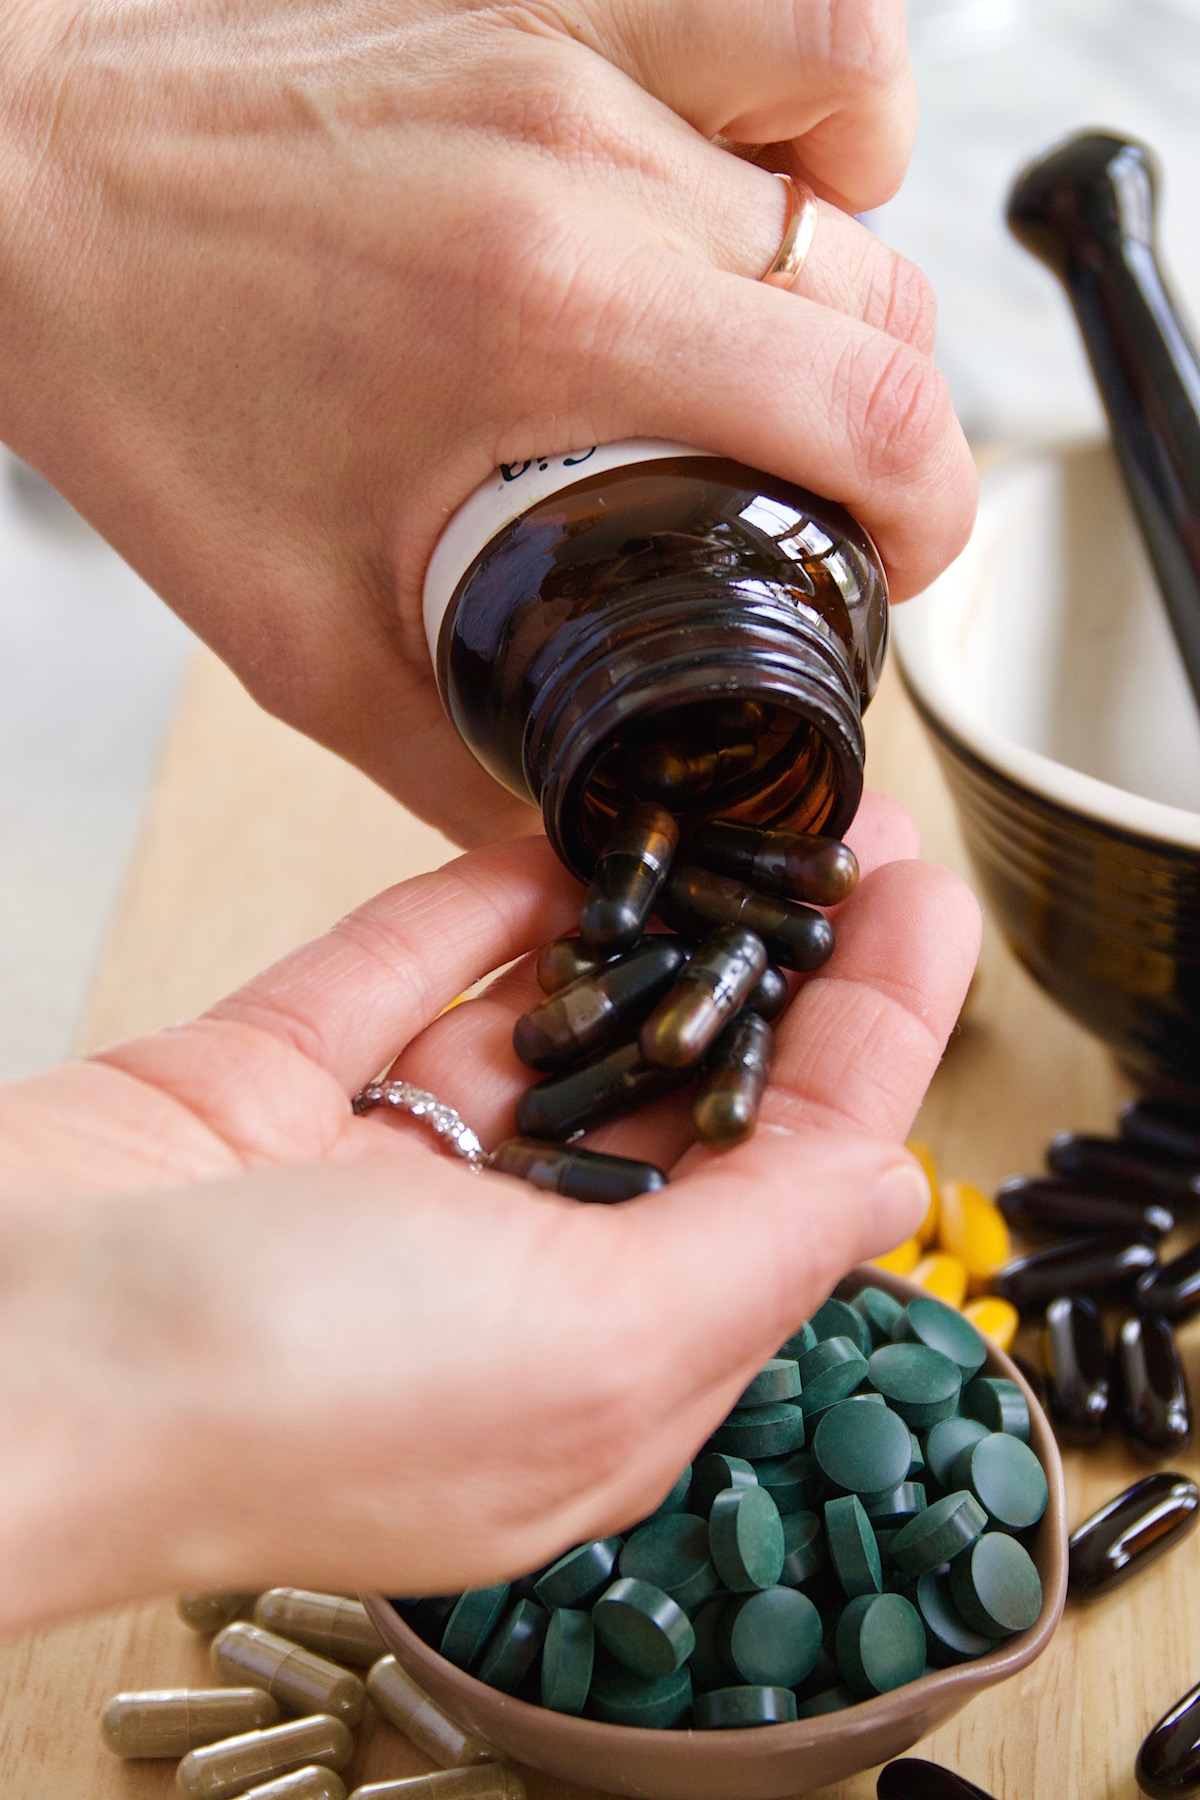 What Could Changes In FDA Dietary Supplement Regulations Mean For Herbalists? | Herbal Academy | Learn how potential changes to FDA dietary supplement regulations surrounding the use and sale of herbs as dietary supplements may effect herbalists. 